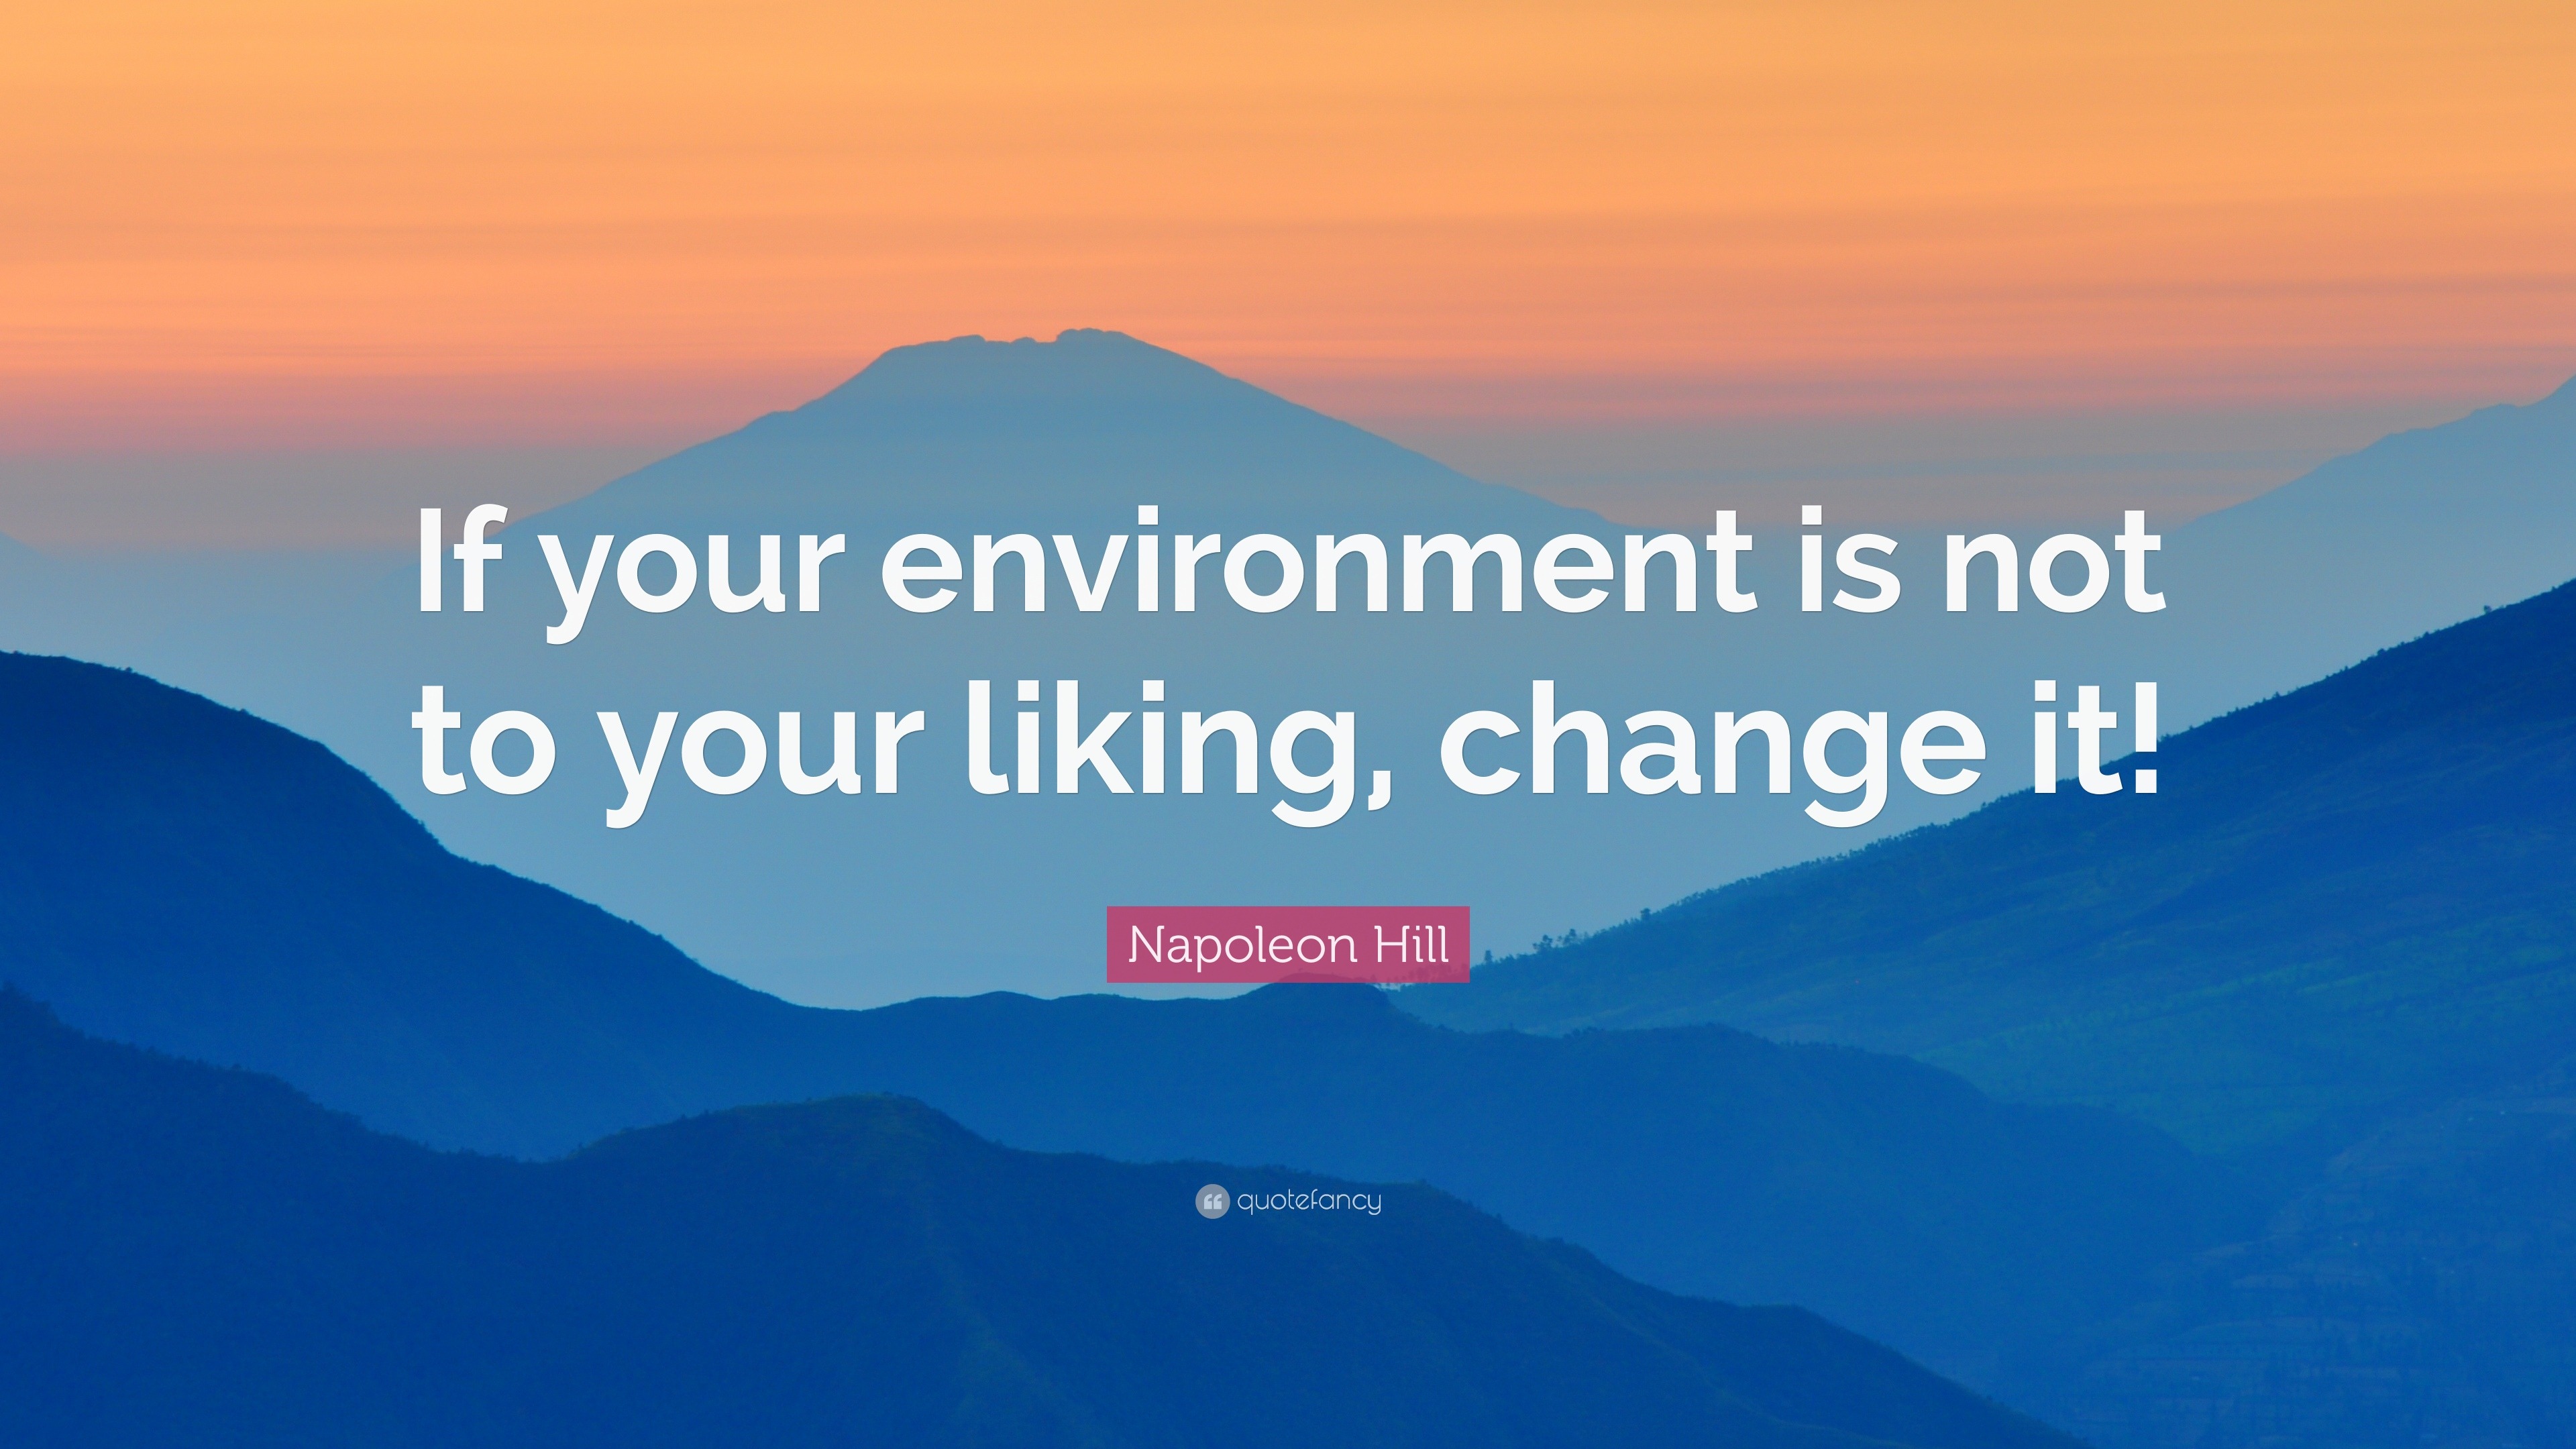 Change Your Environment Quotes - Quotes Collection